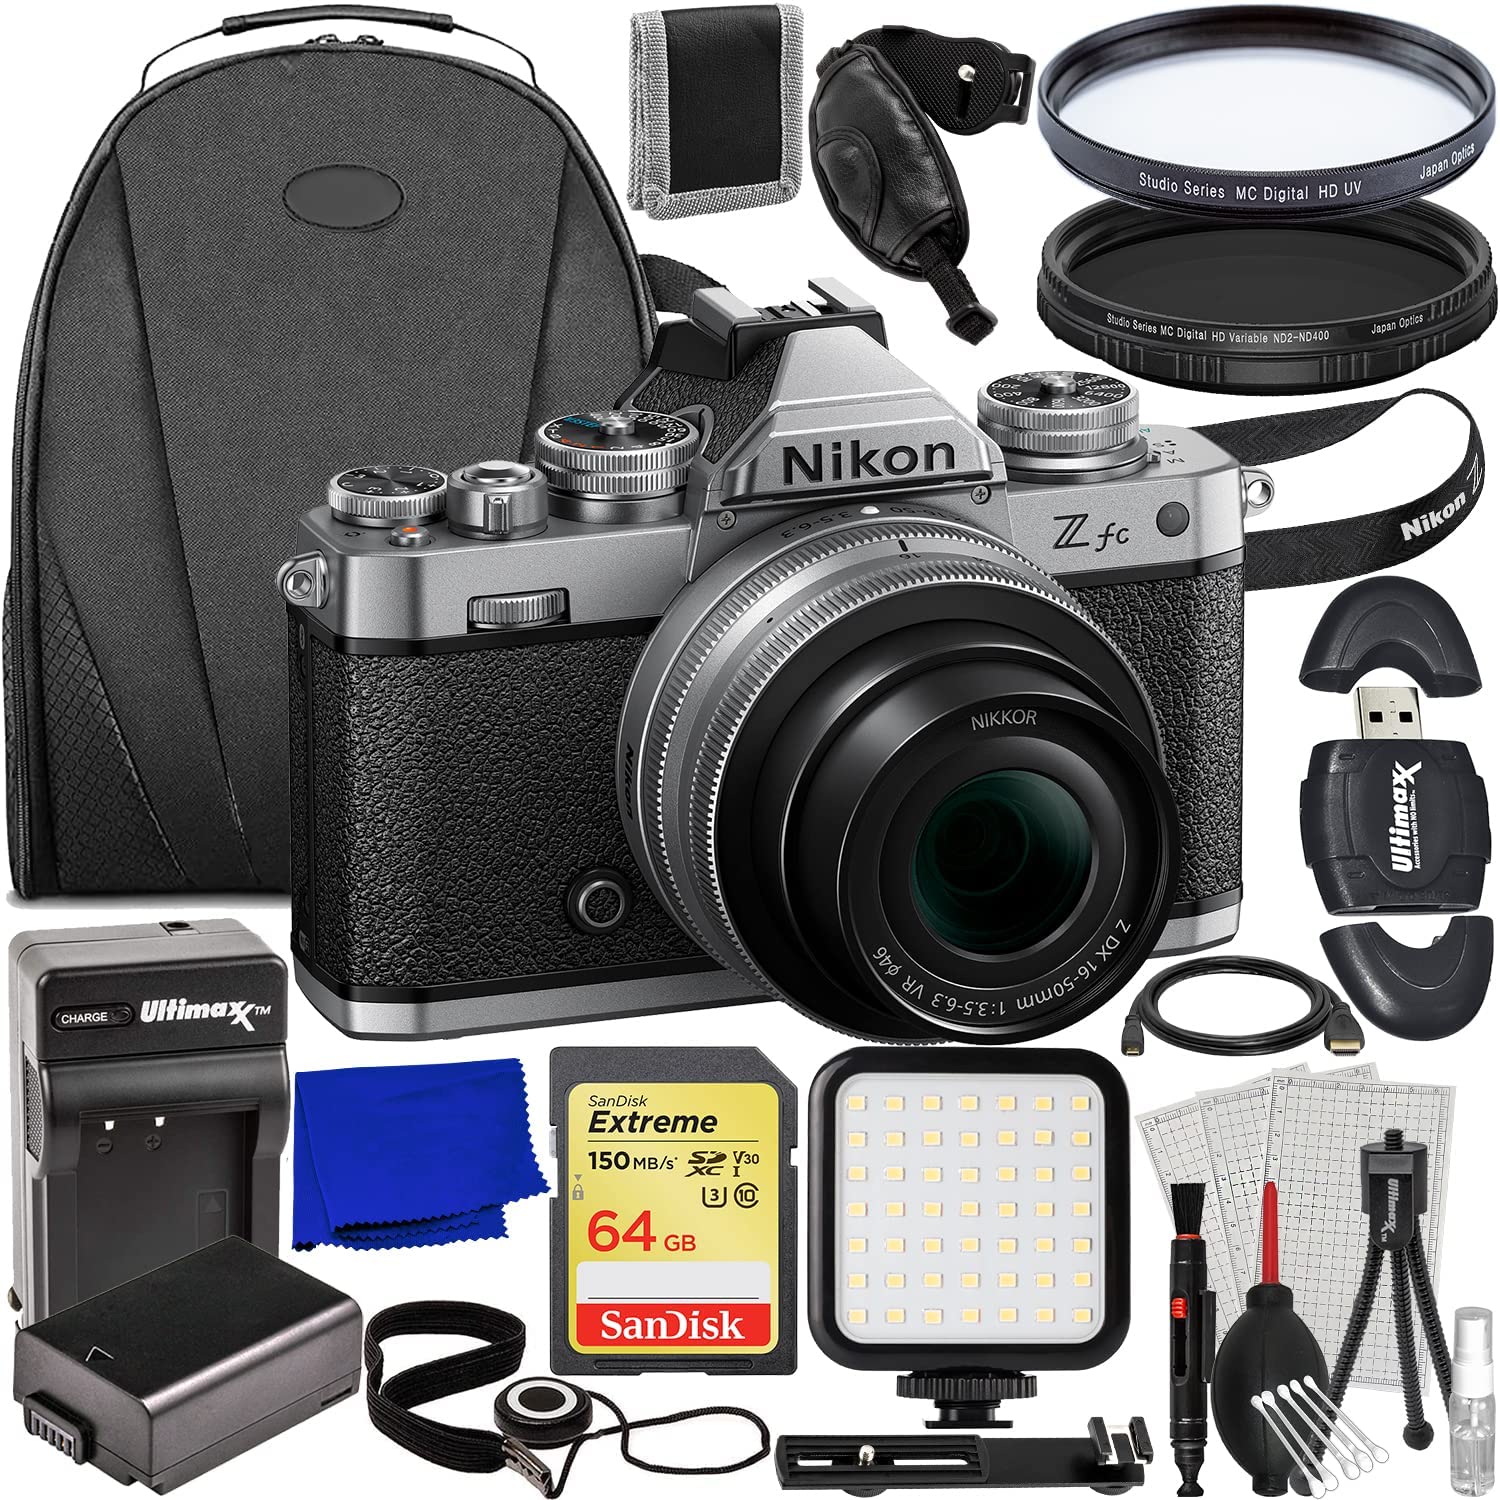 Nikon Zfc Mirrorless Camera with 16-50mm Lens & Essential Accessory Bundle: SanDisk 64GB Extreme SDXC, Spare Battery, Variable Neutral Density Filter (ND2-ND400) & More (25pc Bundle)